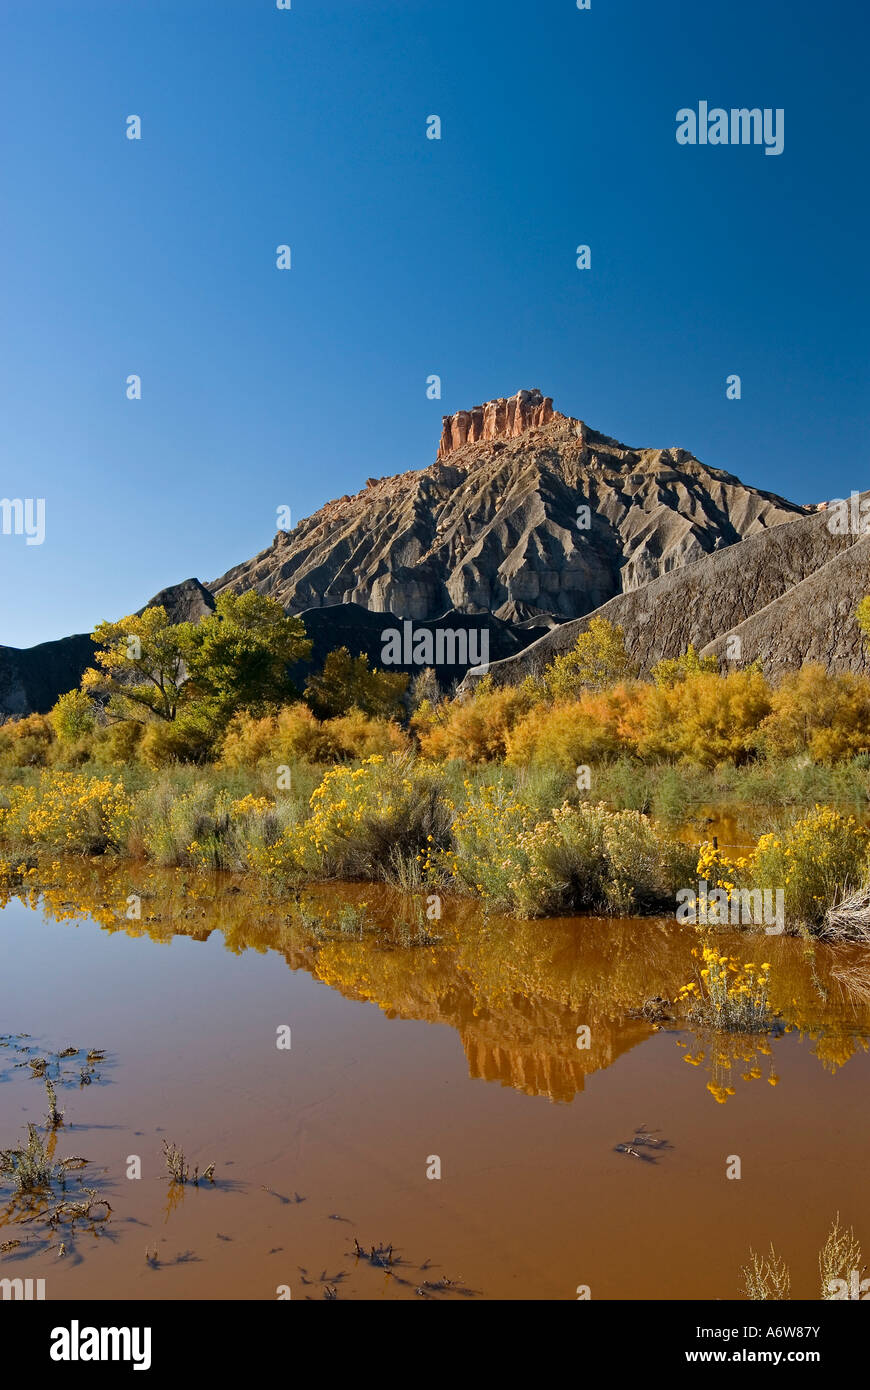 Reflection of North Cainville Mesa in rain puddle, Utah, US Stock Photo